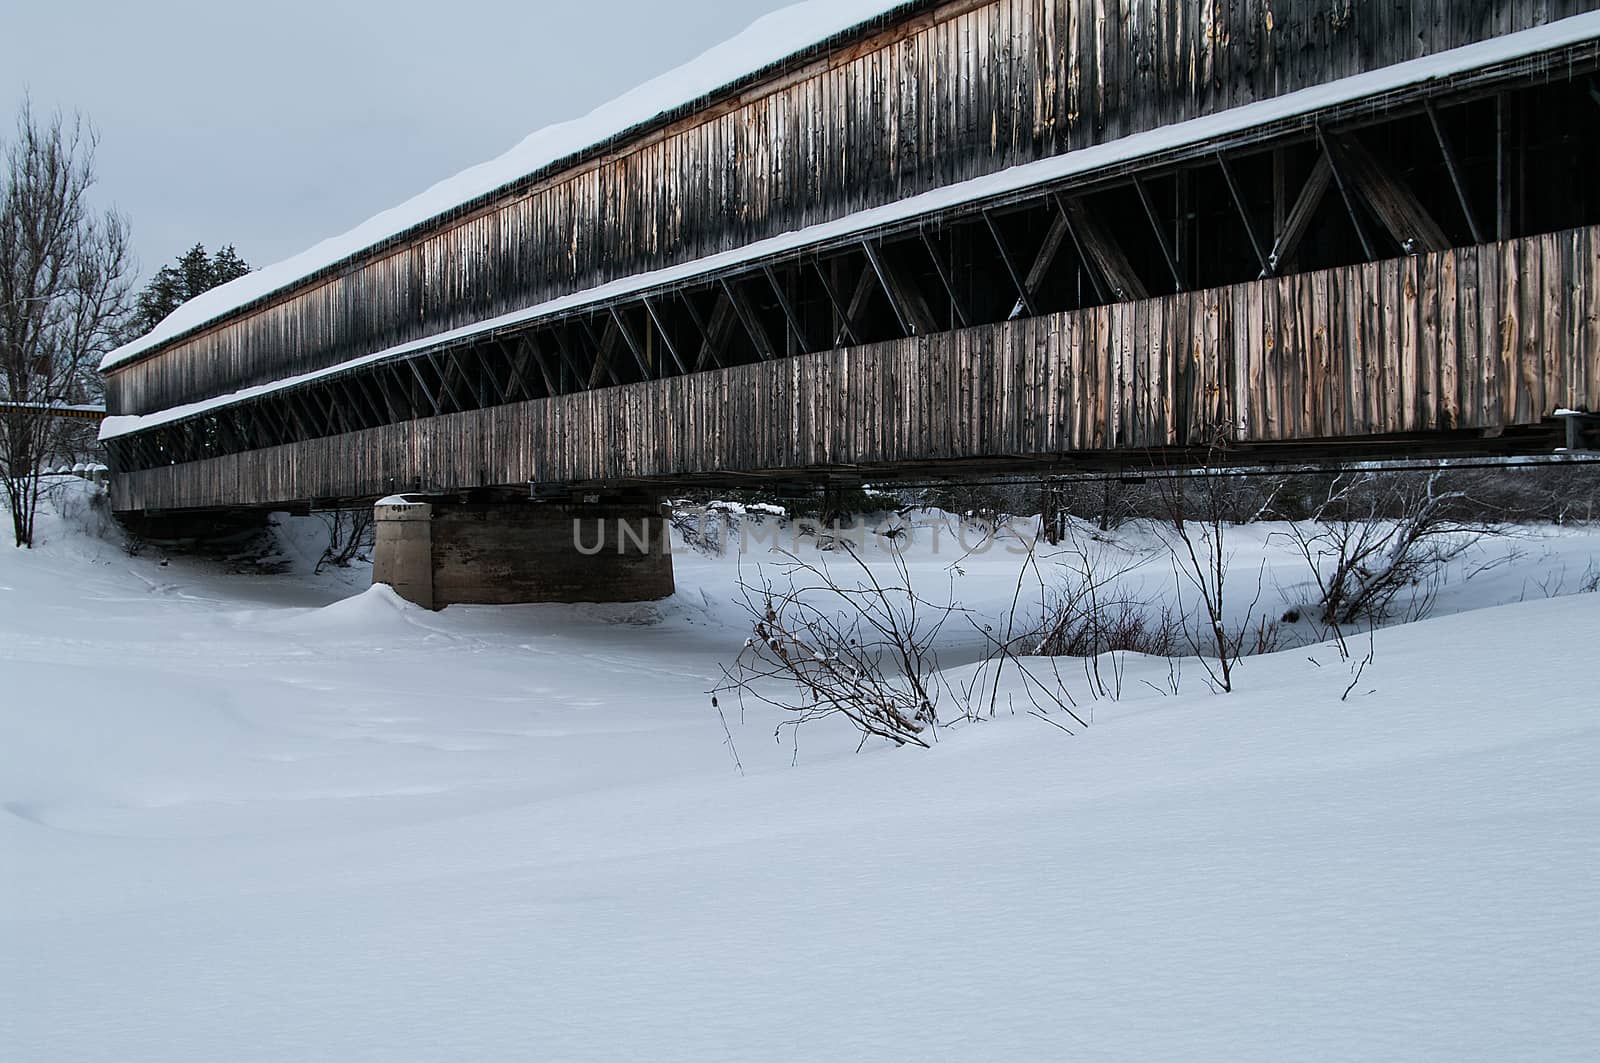 Covered Bridge in the winter by edcorey